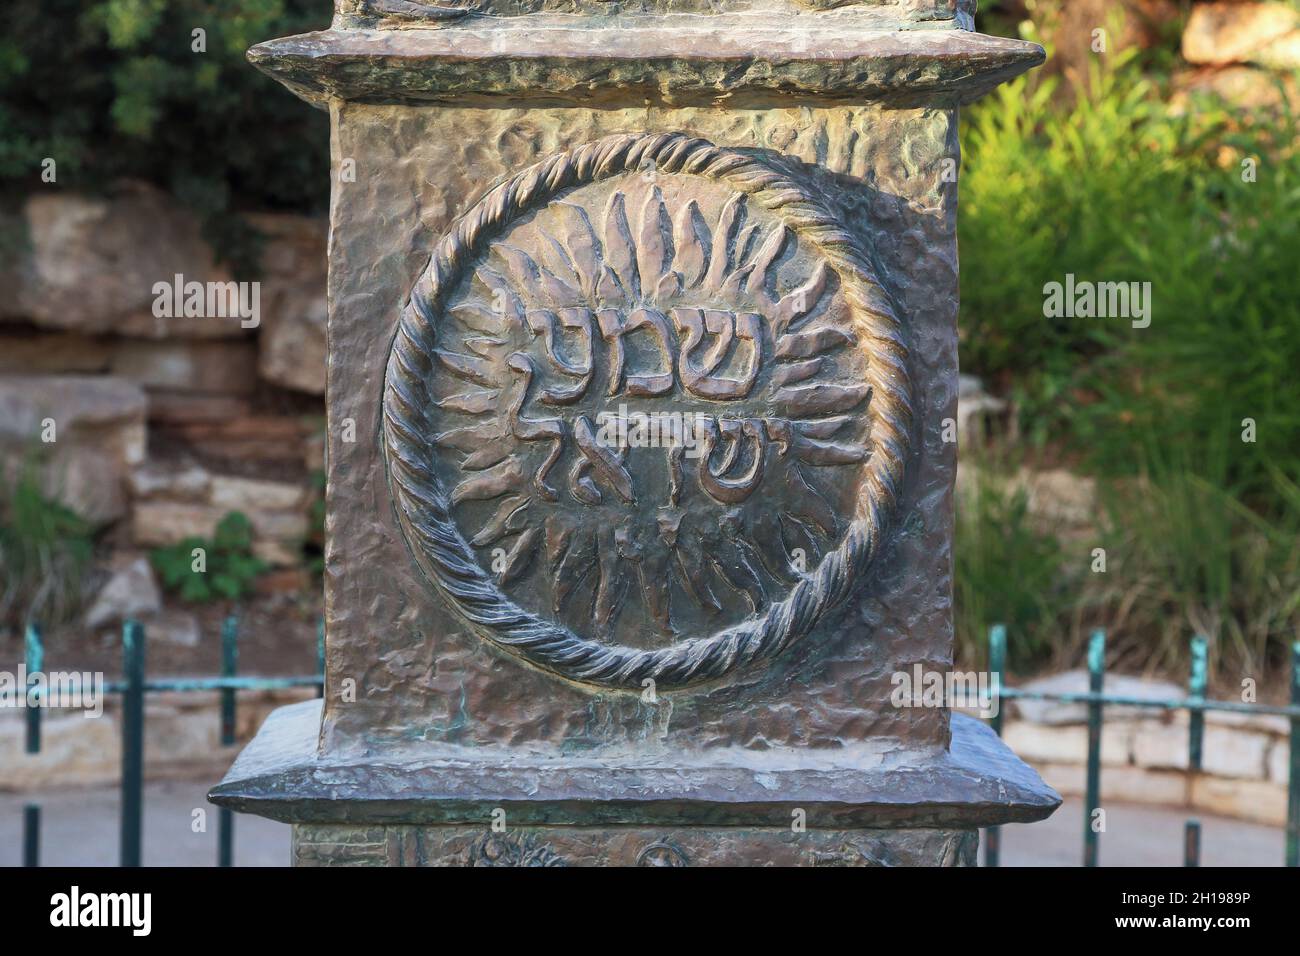 JERUSALEM, ISRAEL - SEPTEMBER 24, 2017: This is a fragment of the Knesset menorah with the caption Listen, Israel. Stock Photo